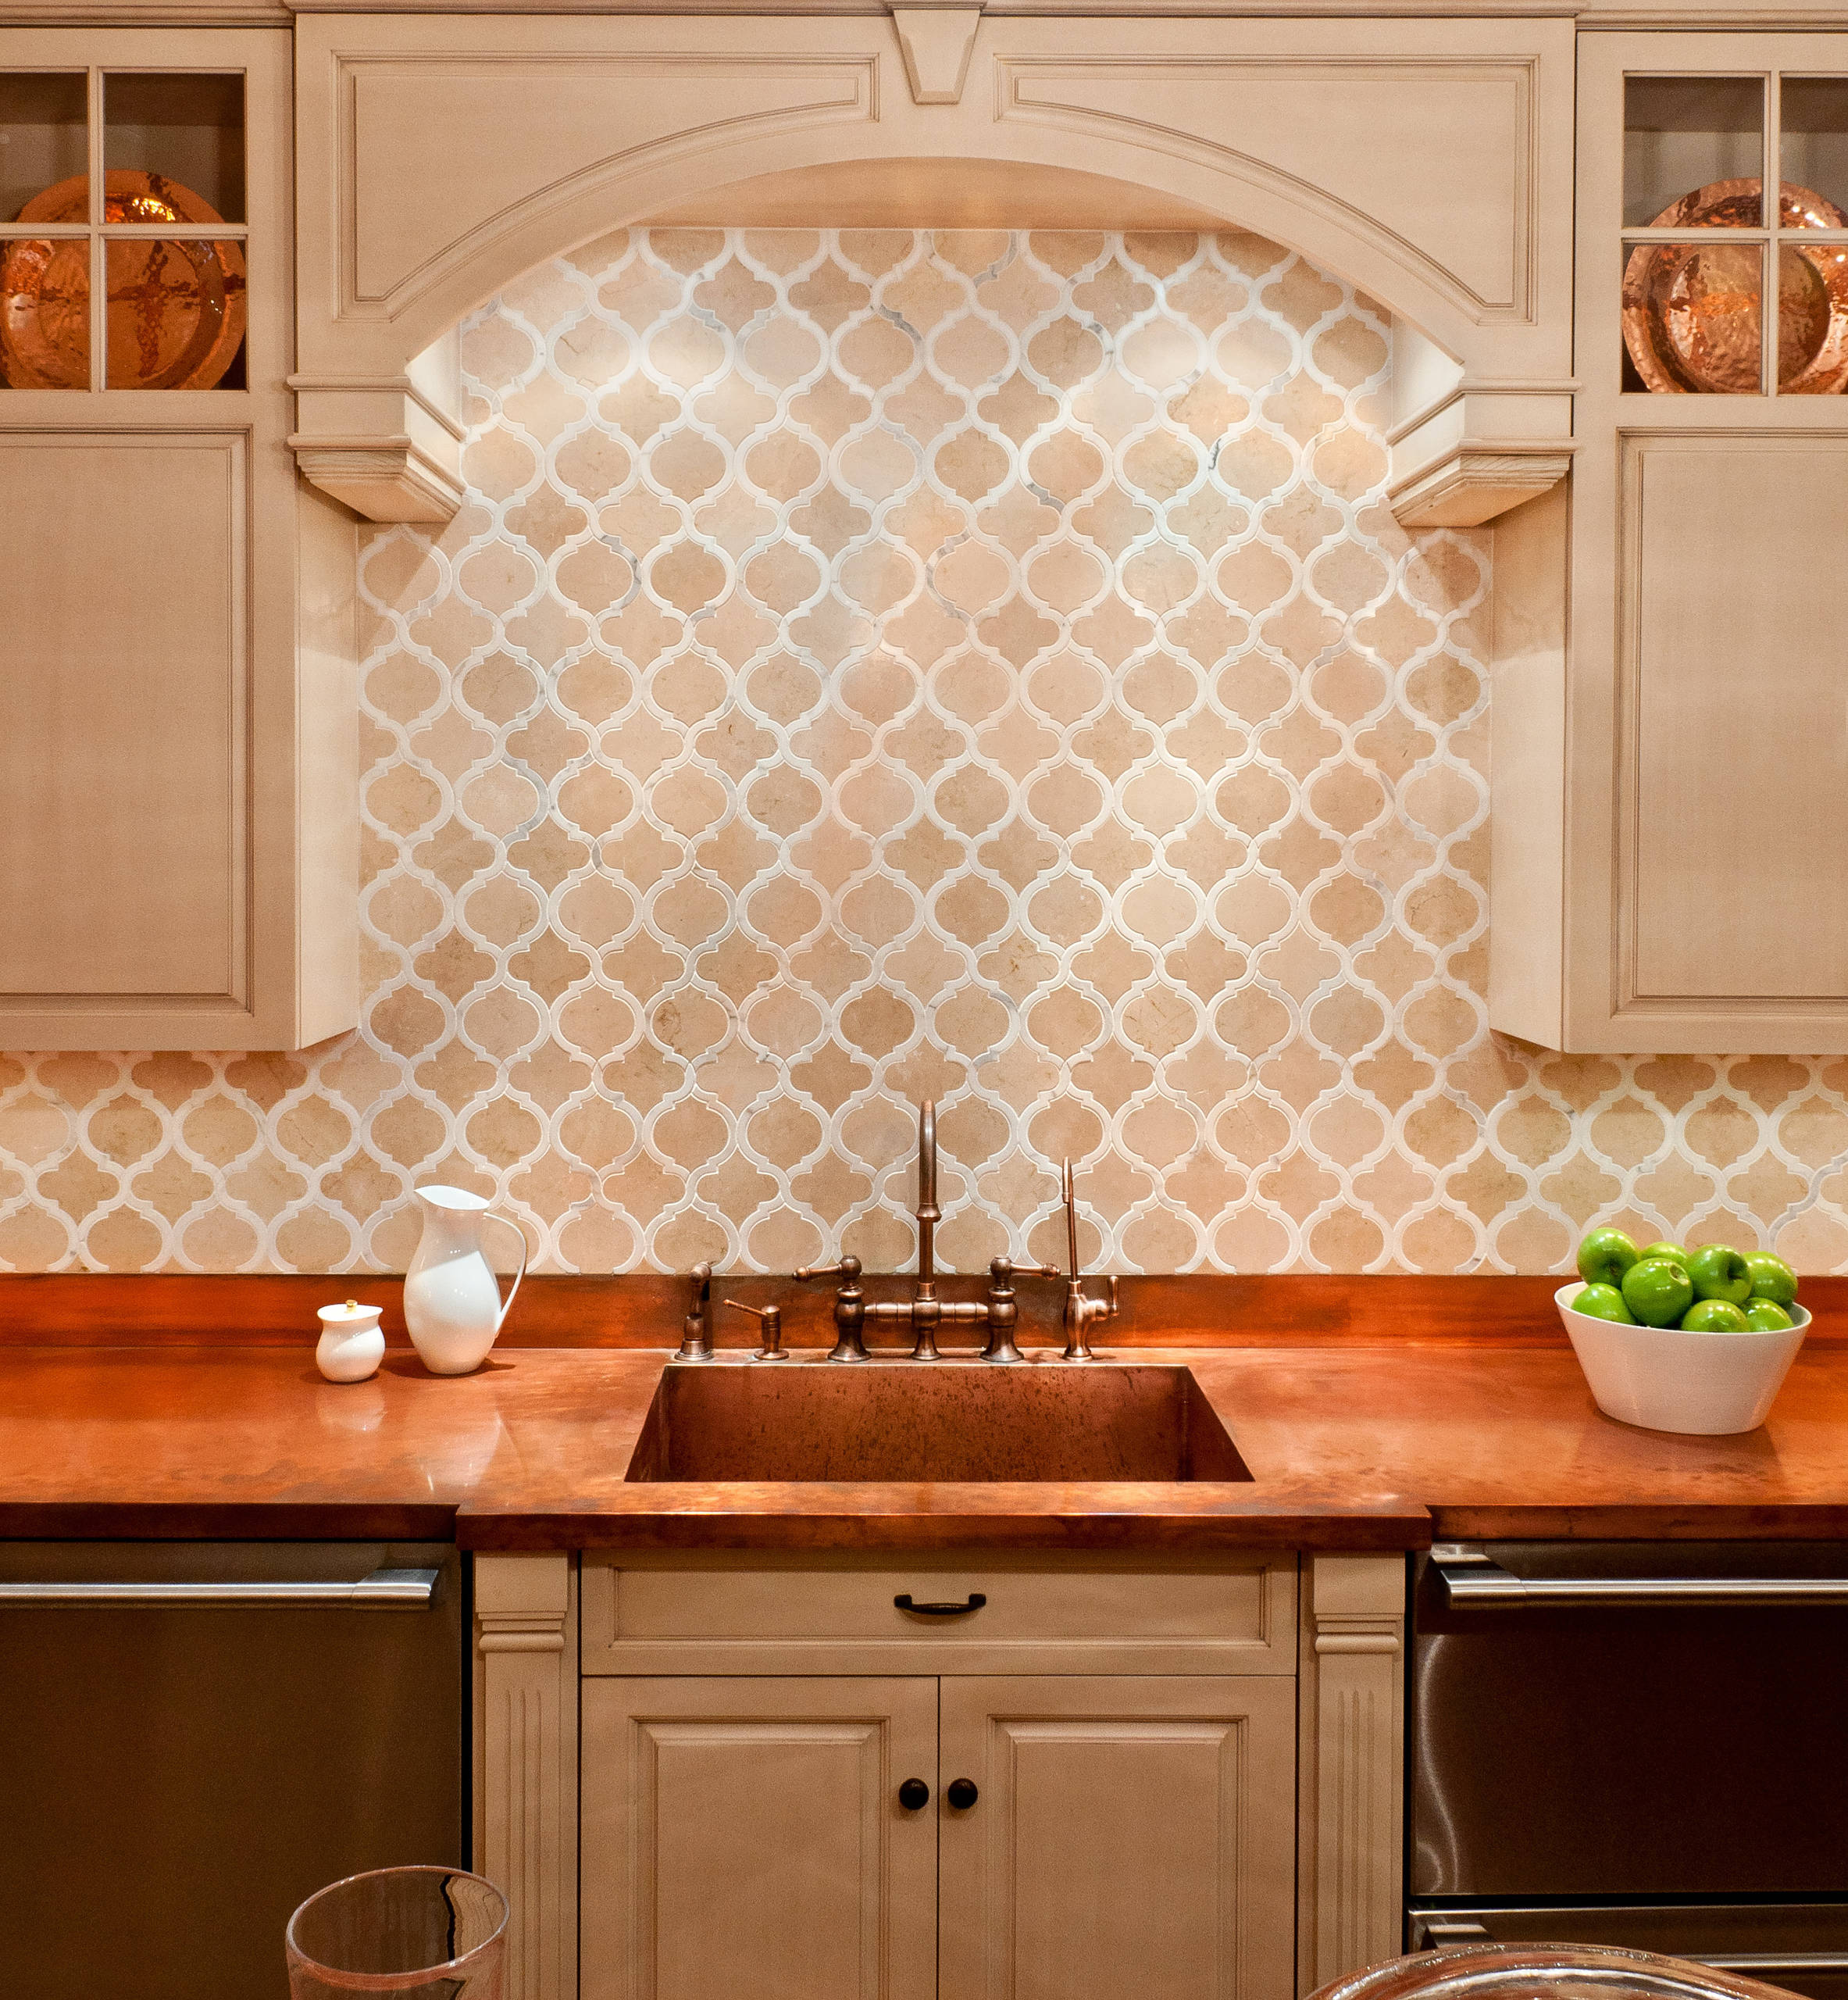 75 Beautiful Kitchen With Copper Countertops And Beige Backsplash Pictures Ideas July 2021 Houzz